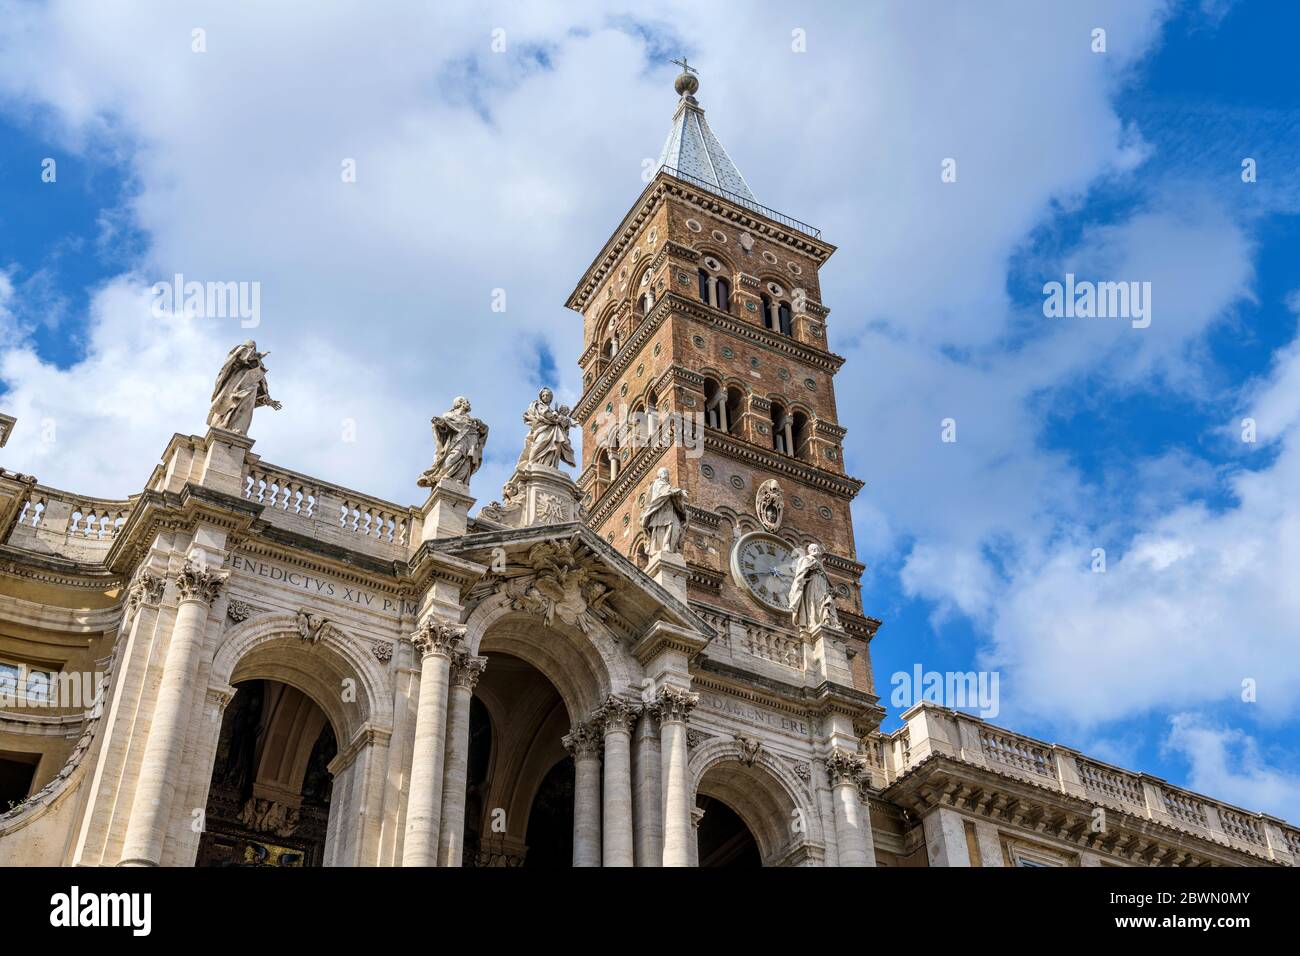 Bell Tower - A close-up and low-angle view of the 14th century Bell Town and the façade statues of the Basilica of Santa Maria Maggiore, Rome, Italy. Stock Photo